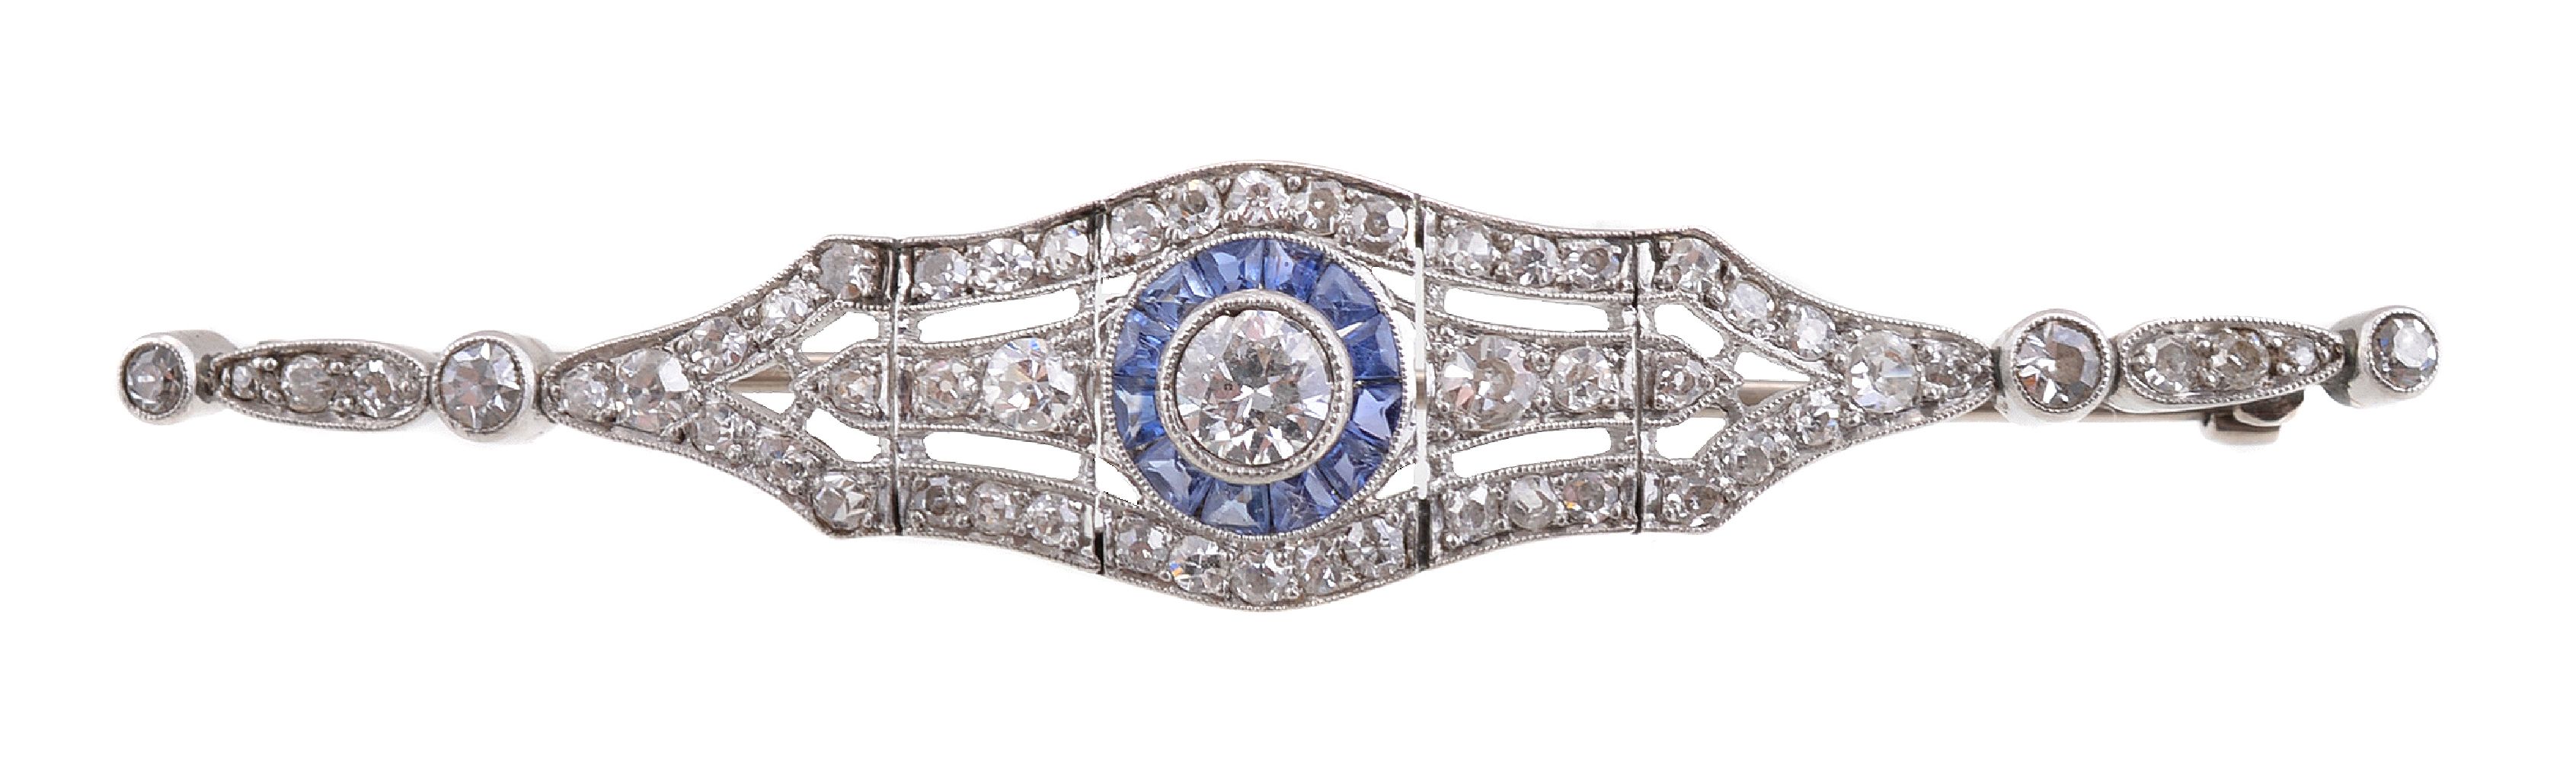 An early 20th century converted diamond and sapphire brooch